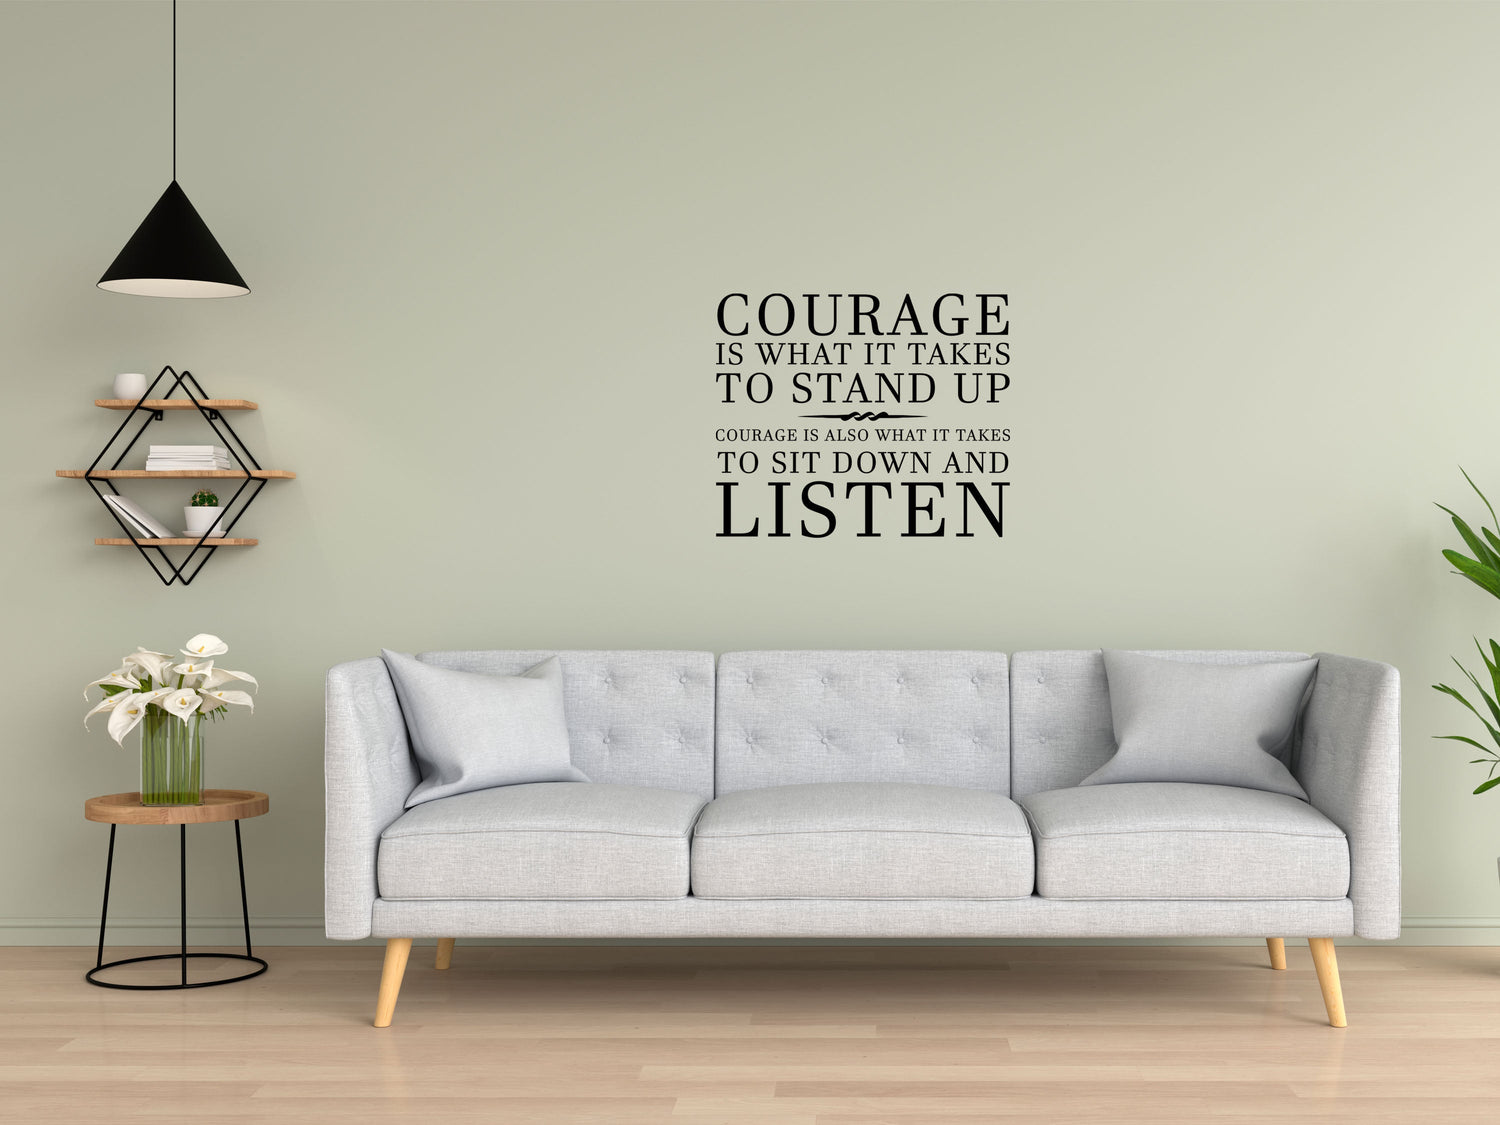 Courage Is What It Takes Vinyl Wall Decal Winston Churchill Wall Decal Handmade Vinyl Wall Art - Motivational Wall Decal Wall Quote Vinyl Wall Decal Inspirational Wall Signs 